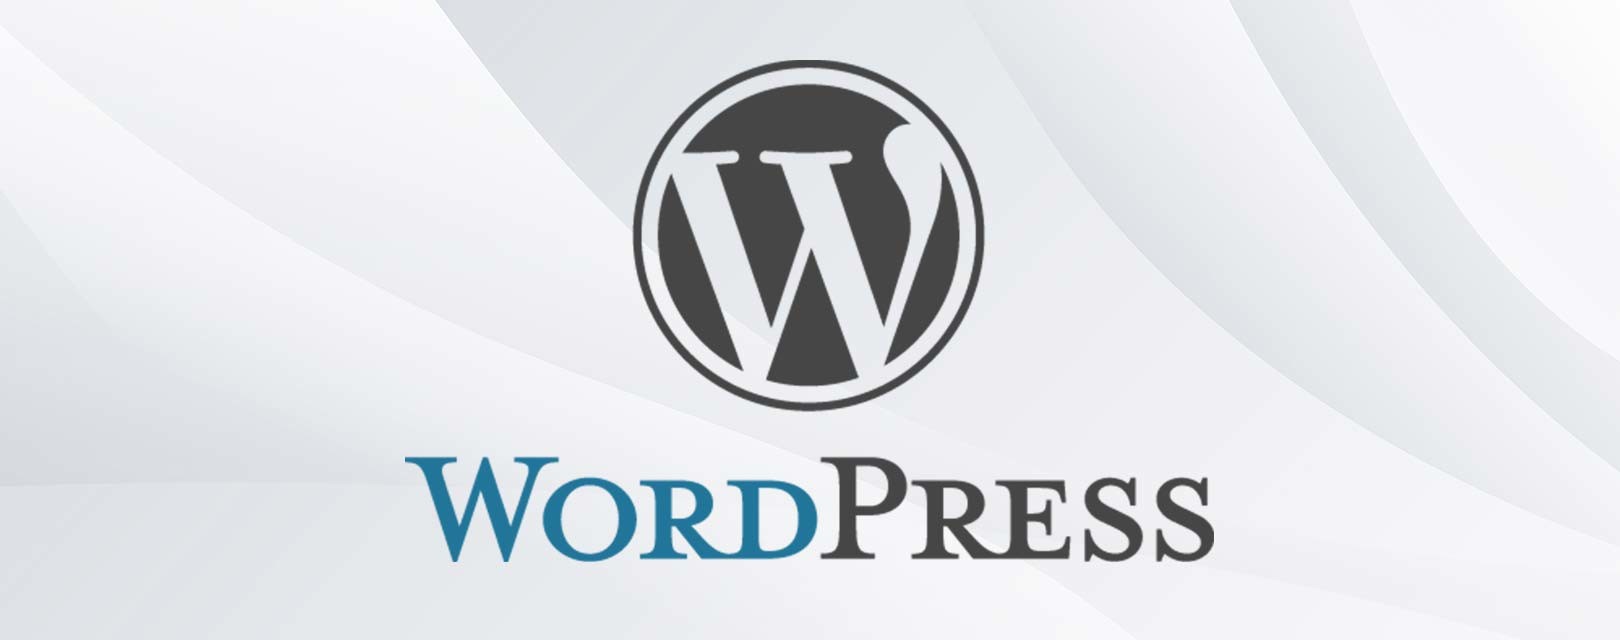 Word press logo on black and white back ground